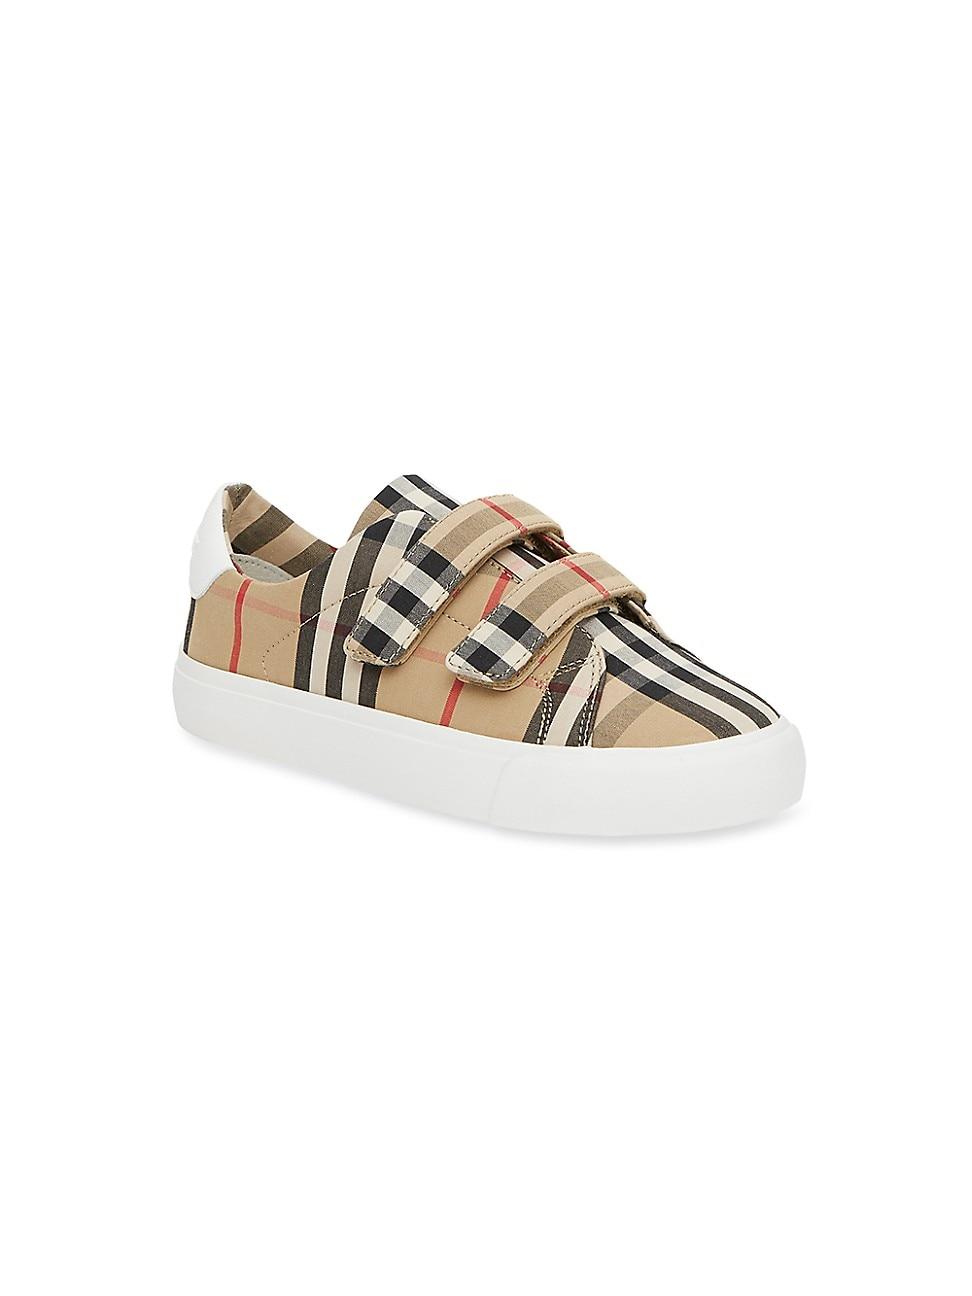 Burberry Baby's & Little Markham Check Sneakers in Lyst